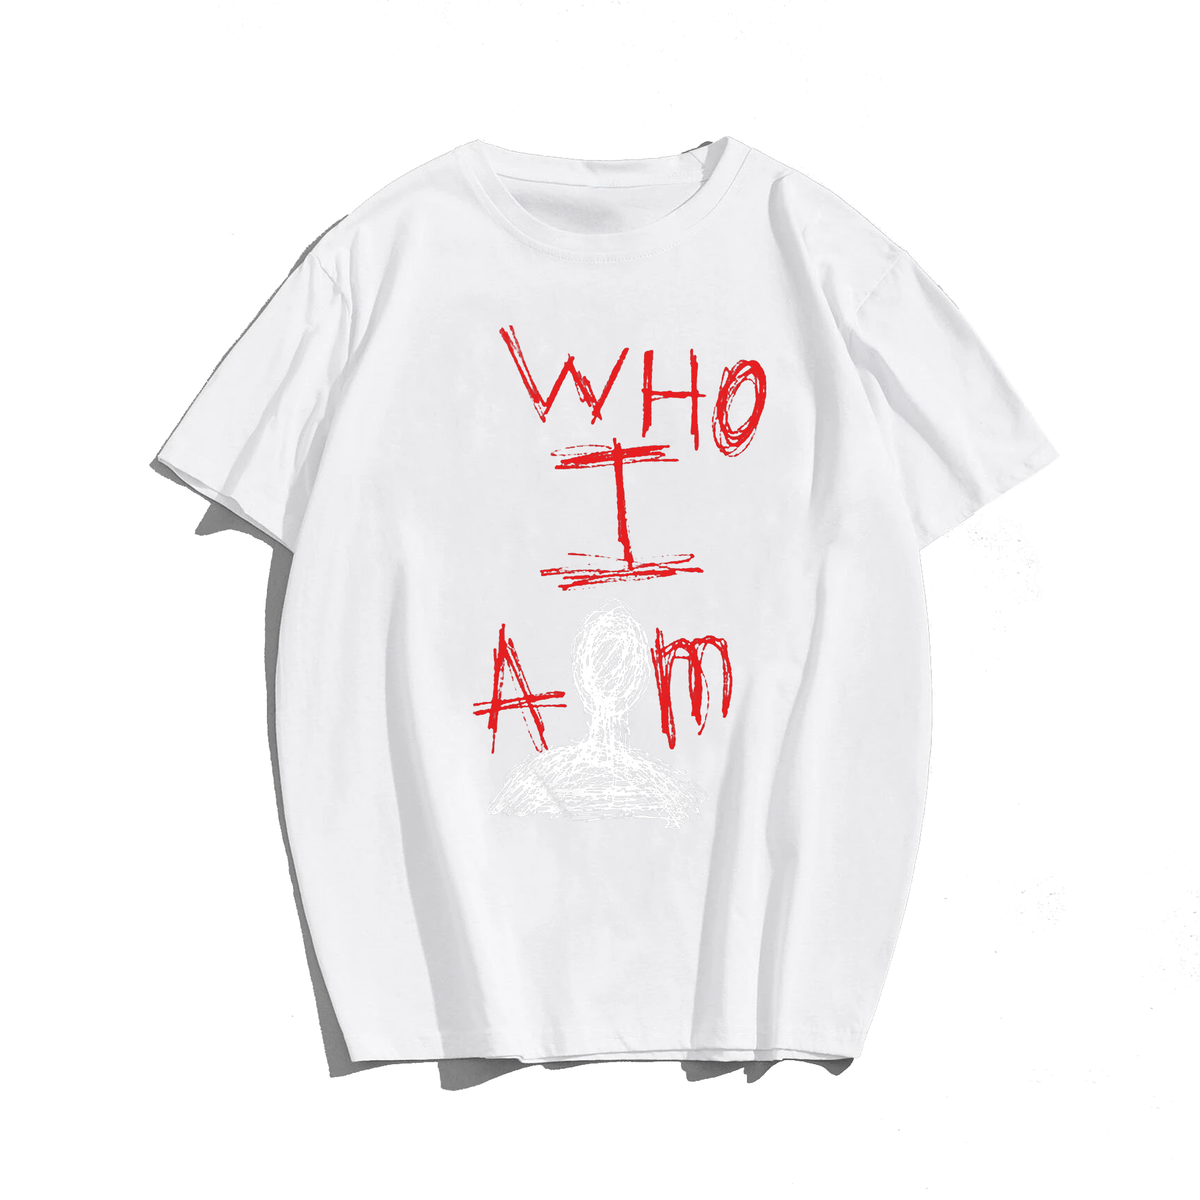 Who I Am, Creative Men Plus Size Oversize T-shirt for Big & Tall Man